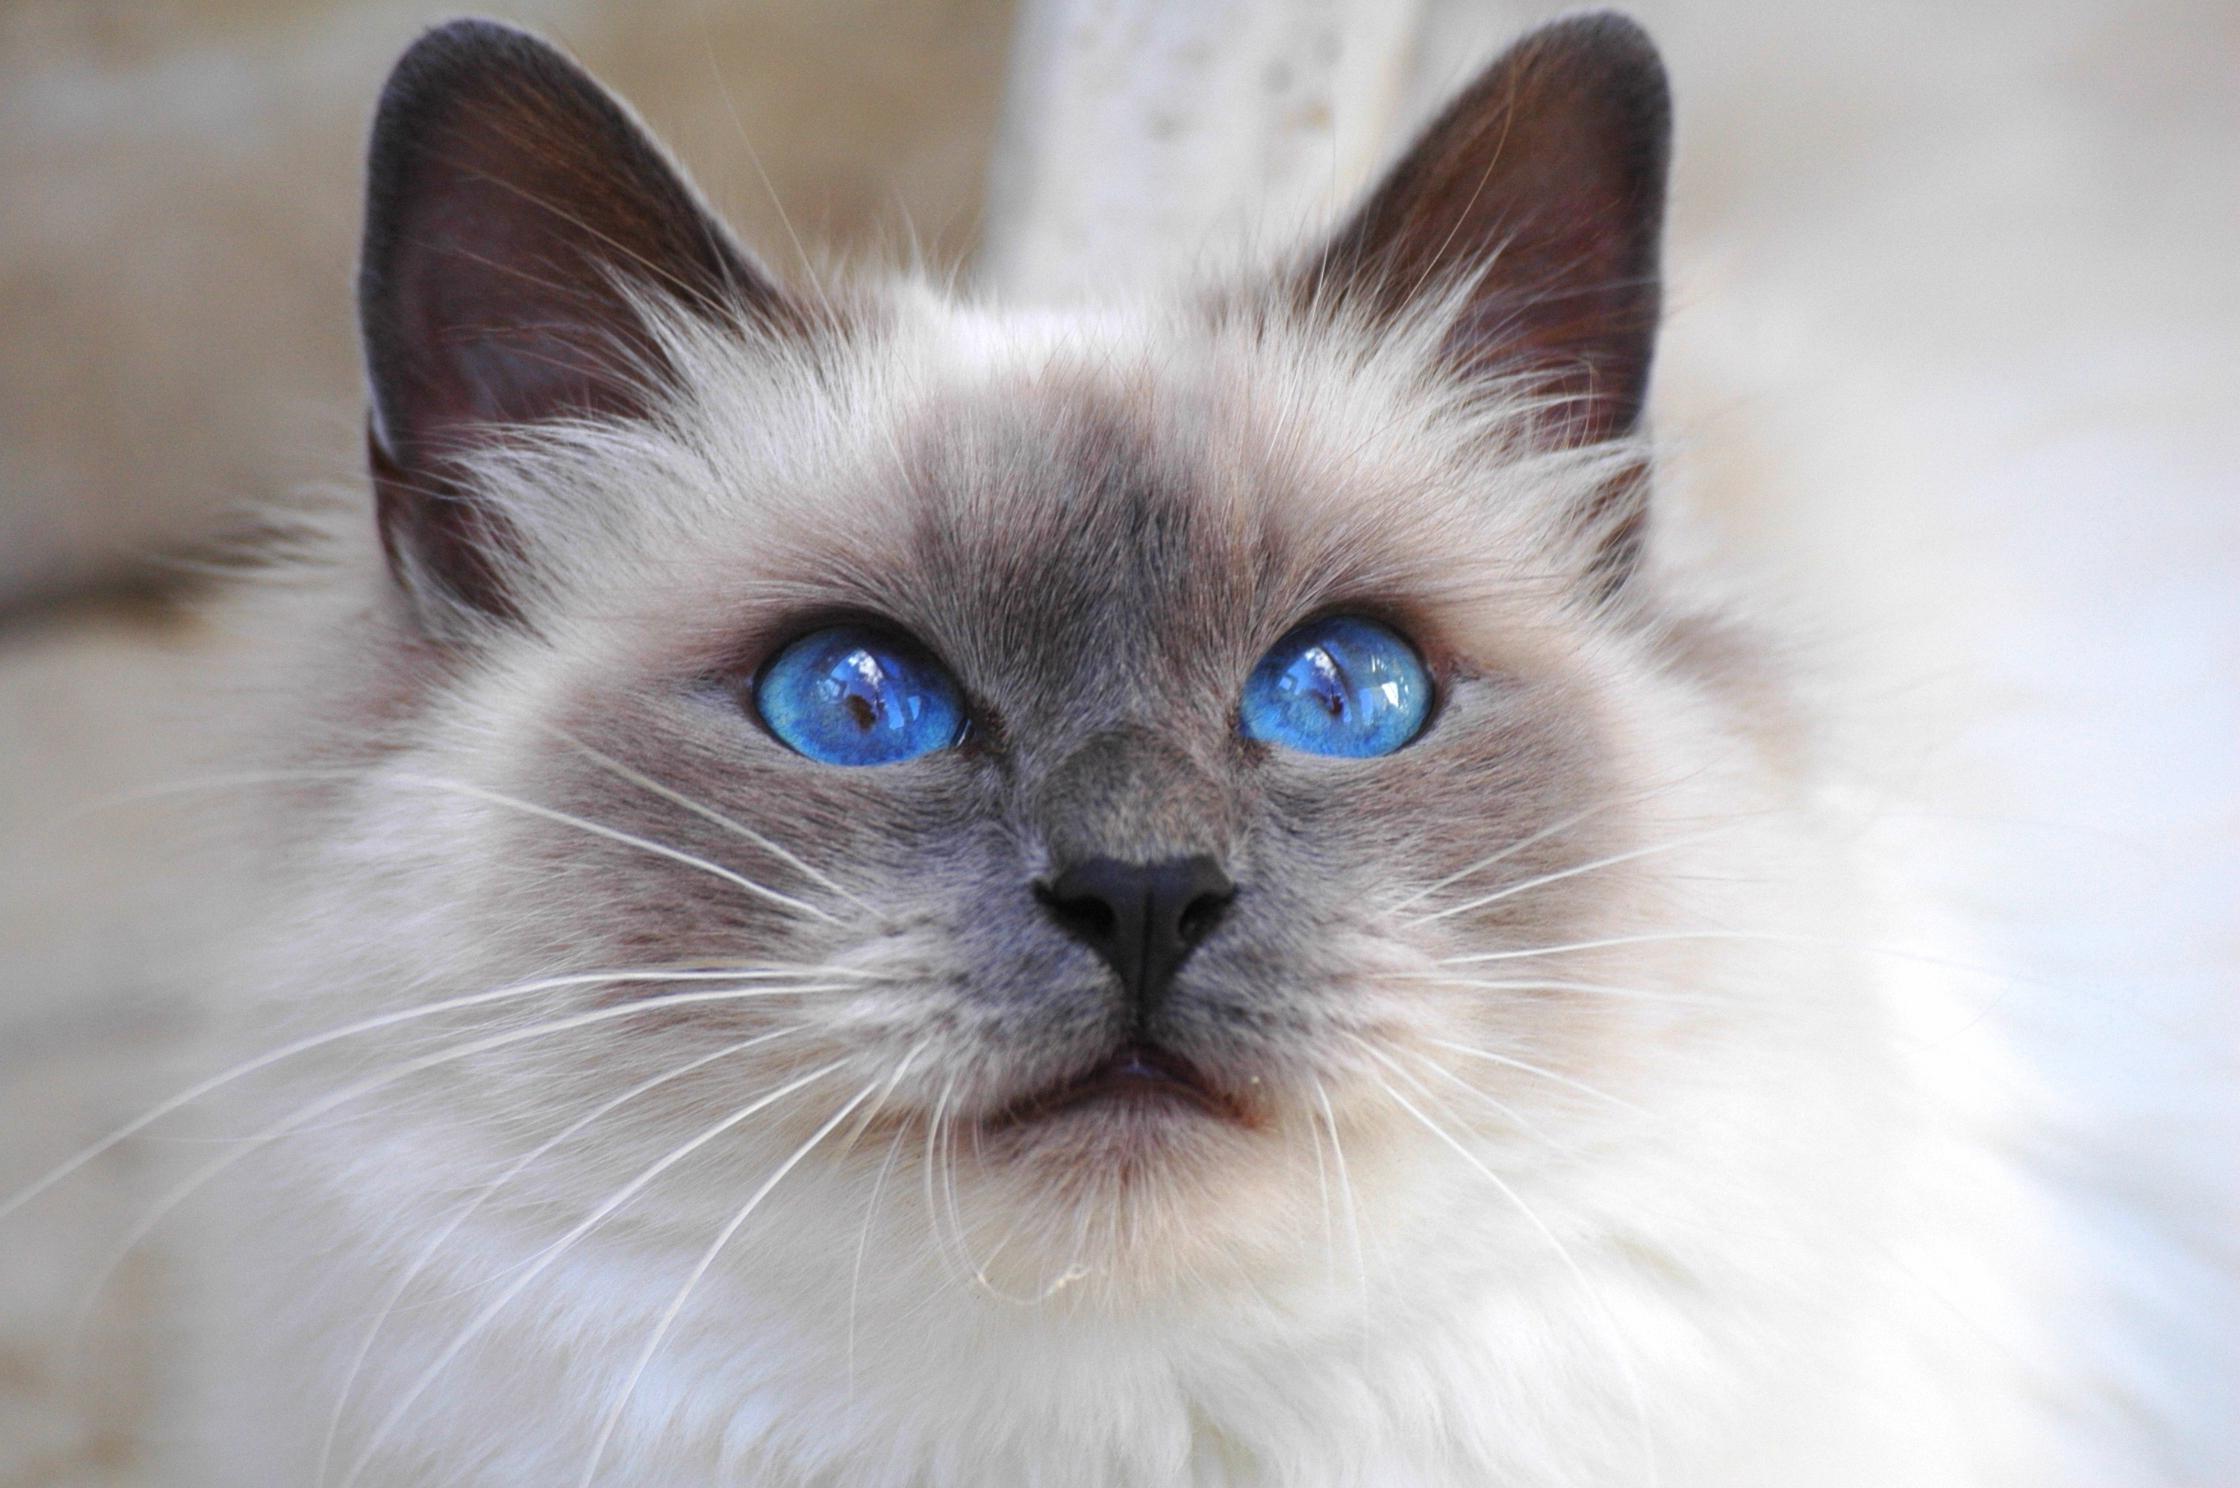 Download PC Wallpaper cats, animal, cat, blue eyes, eye, face, fluffy, gray